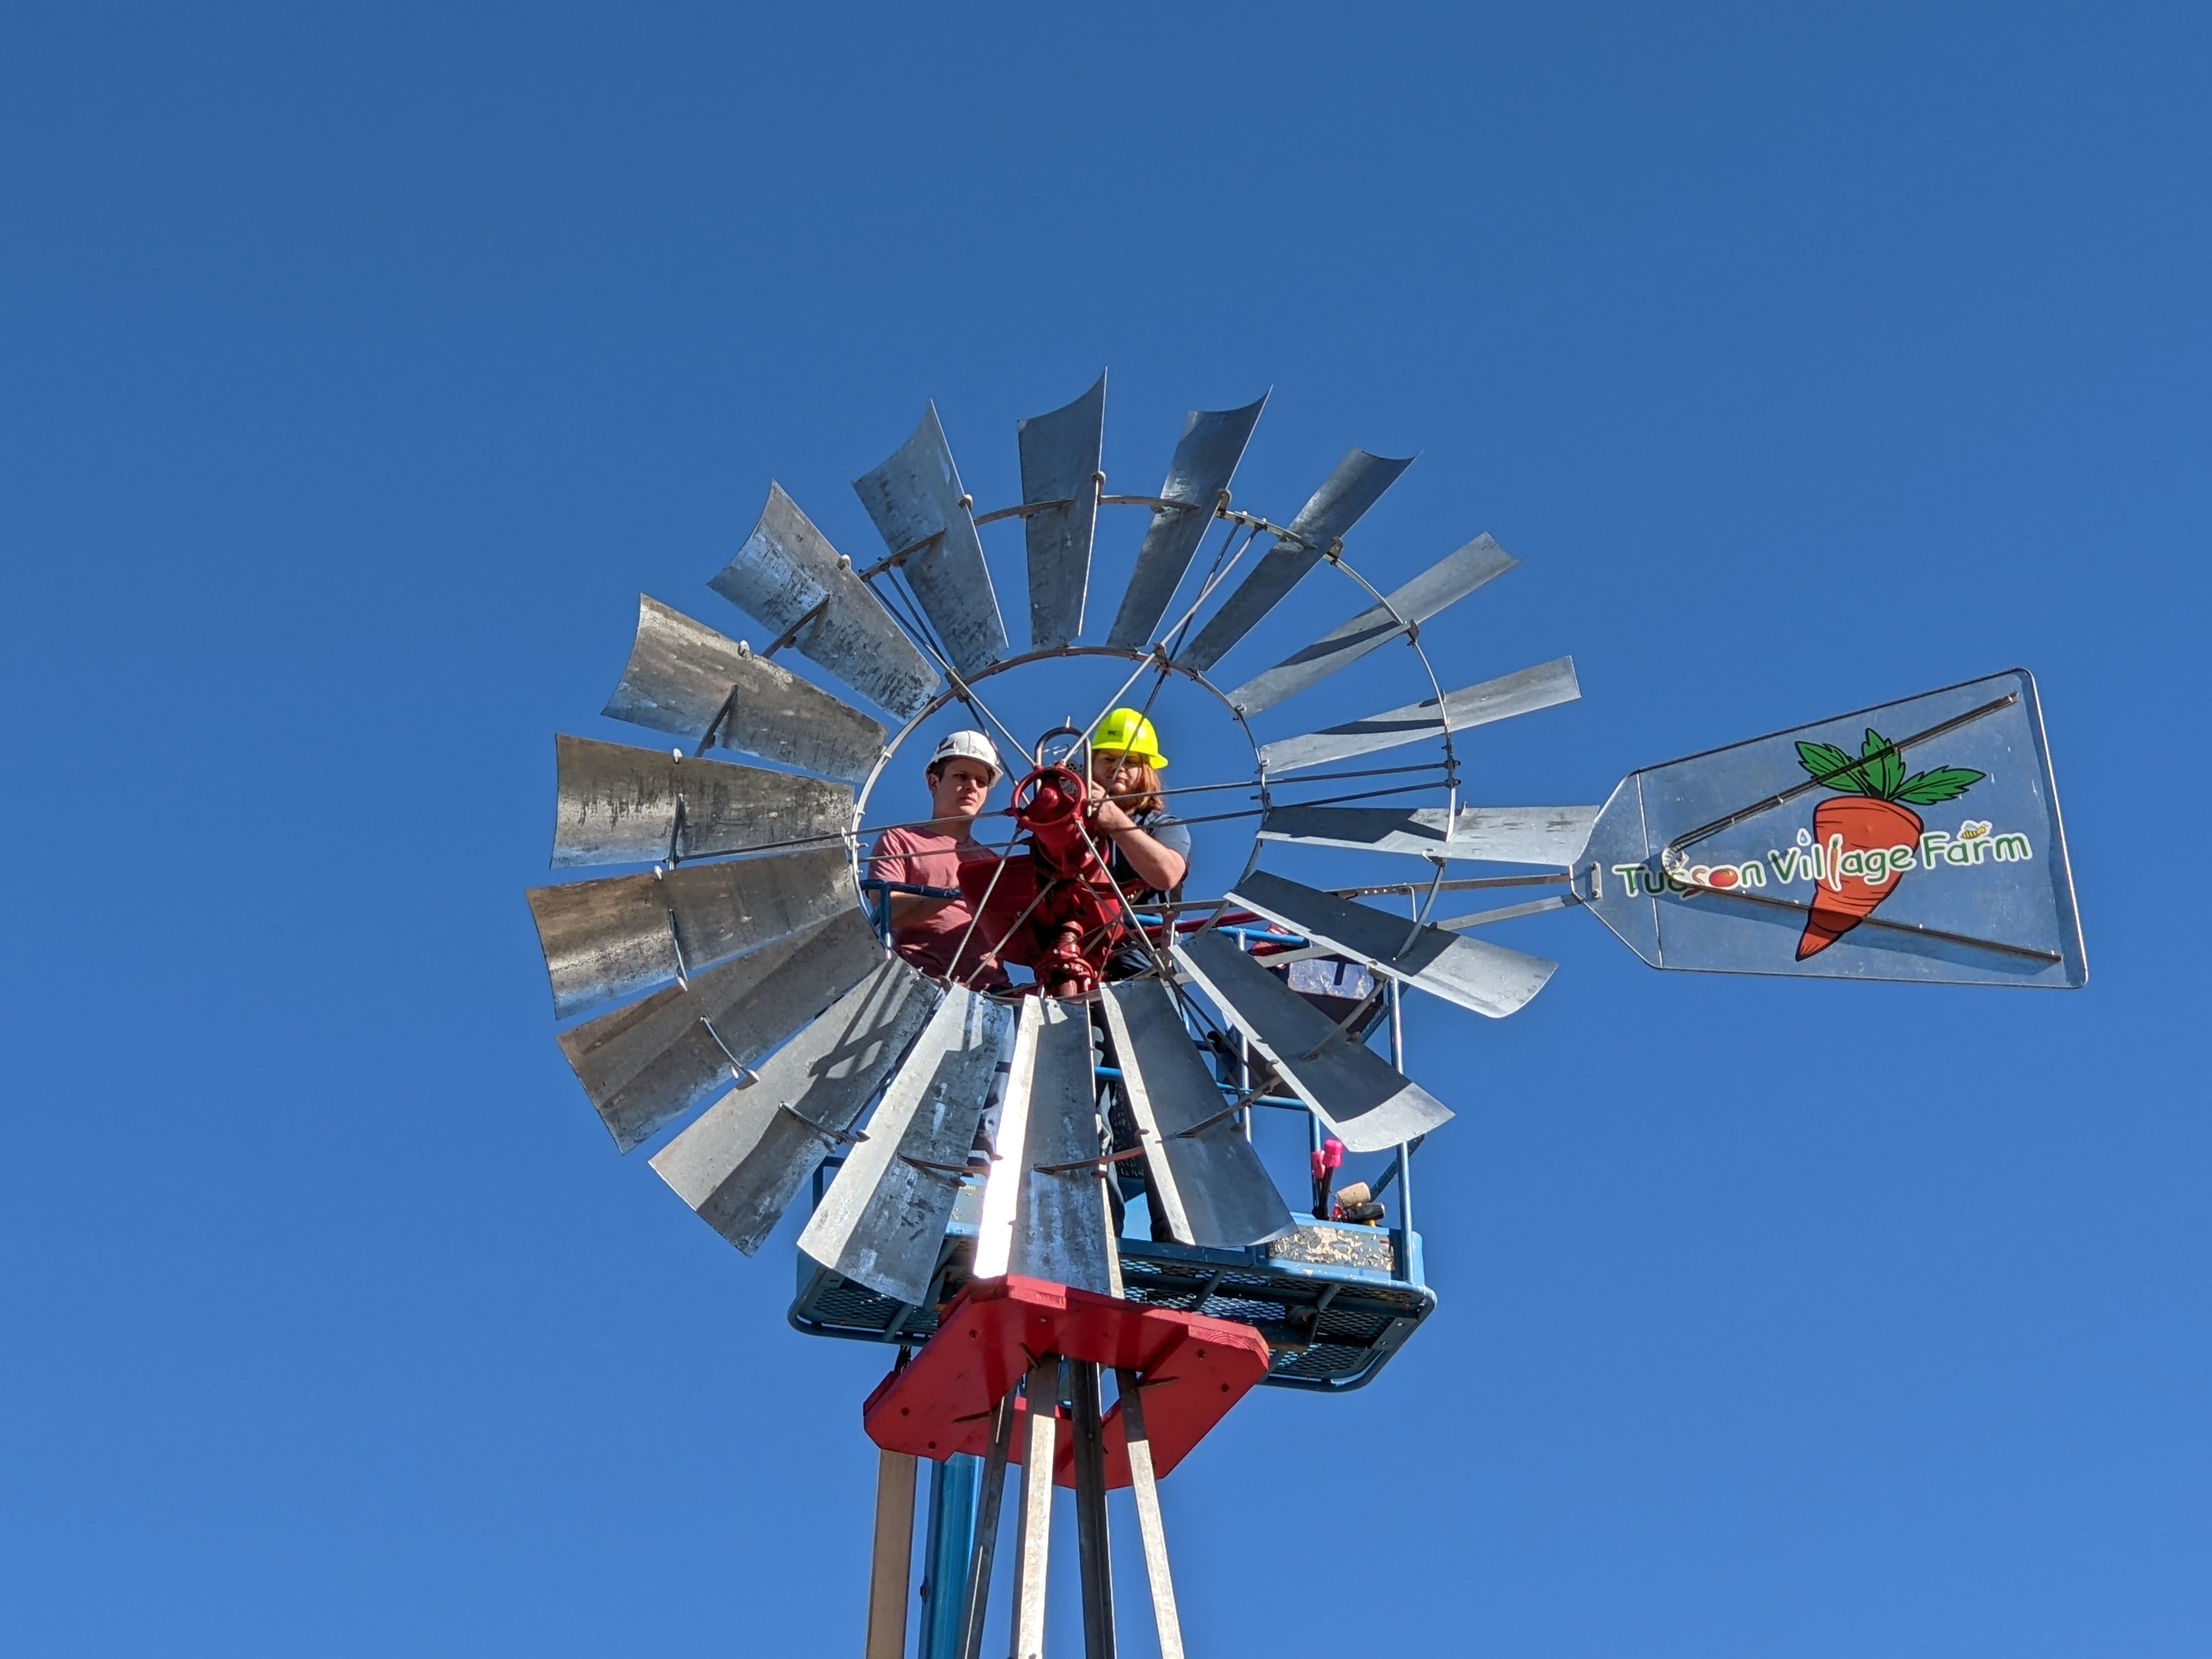 Two students look at the camera through the center of a decorative windmill. Behind them is a blue sky